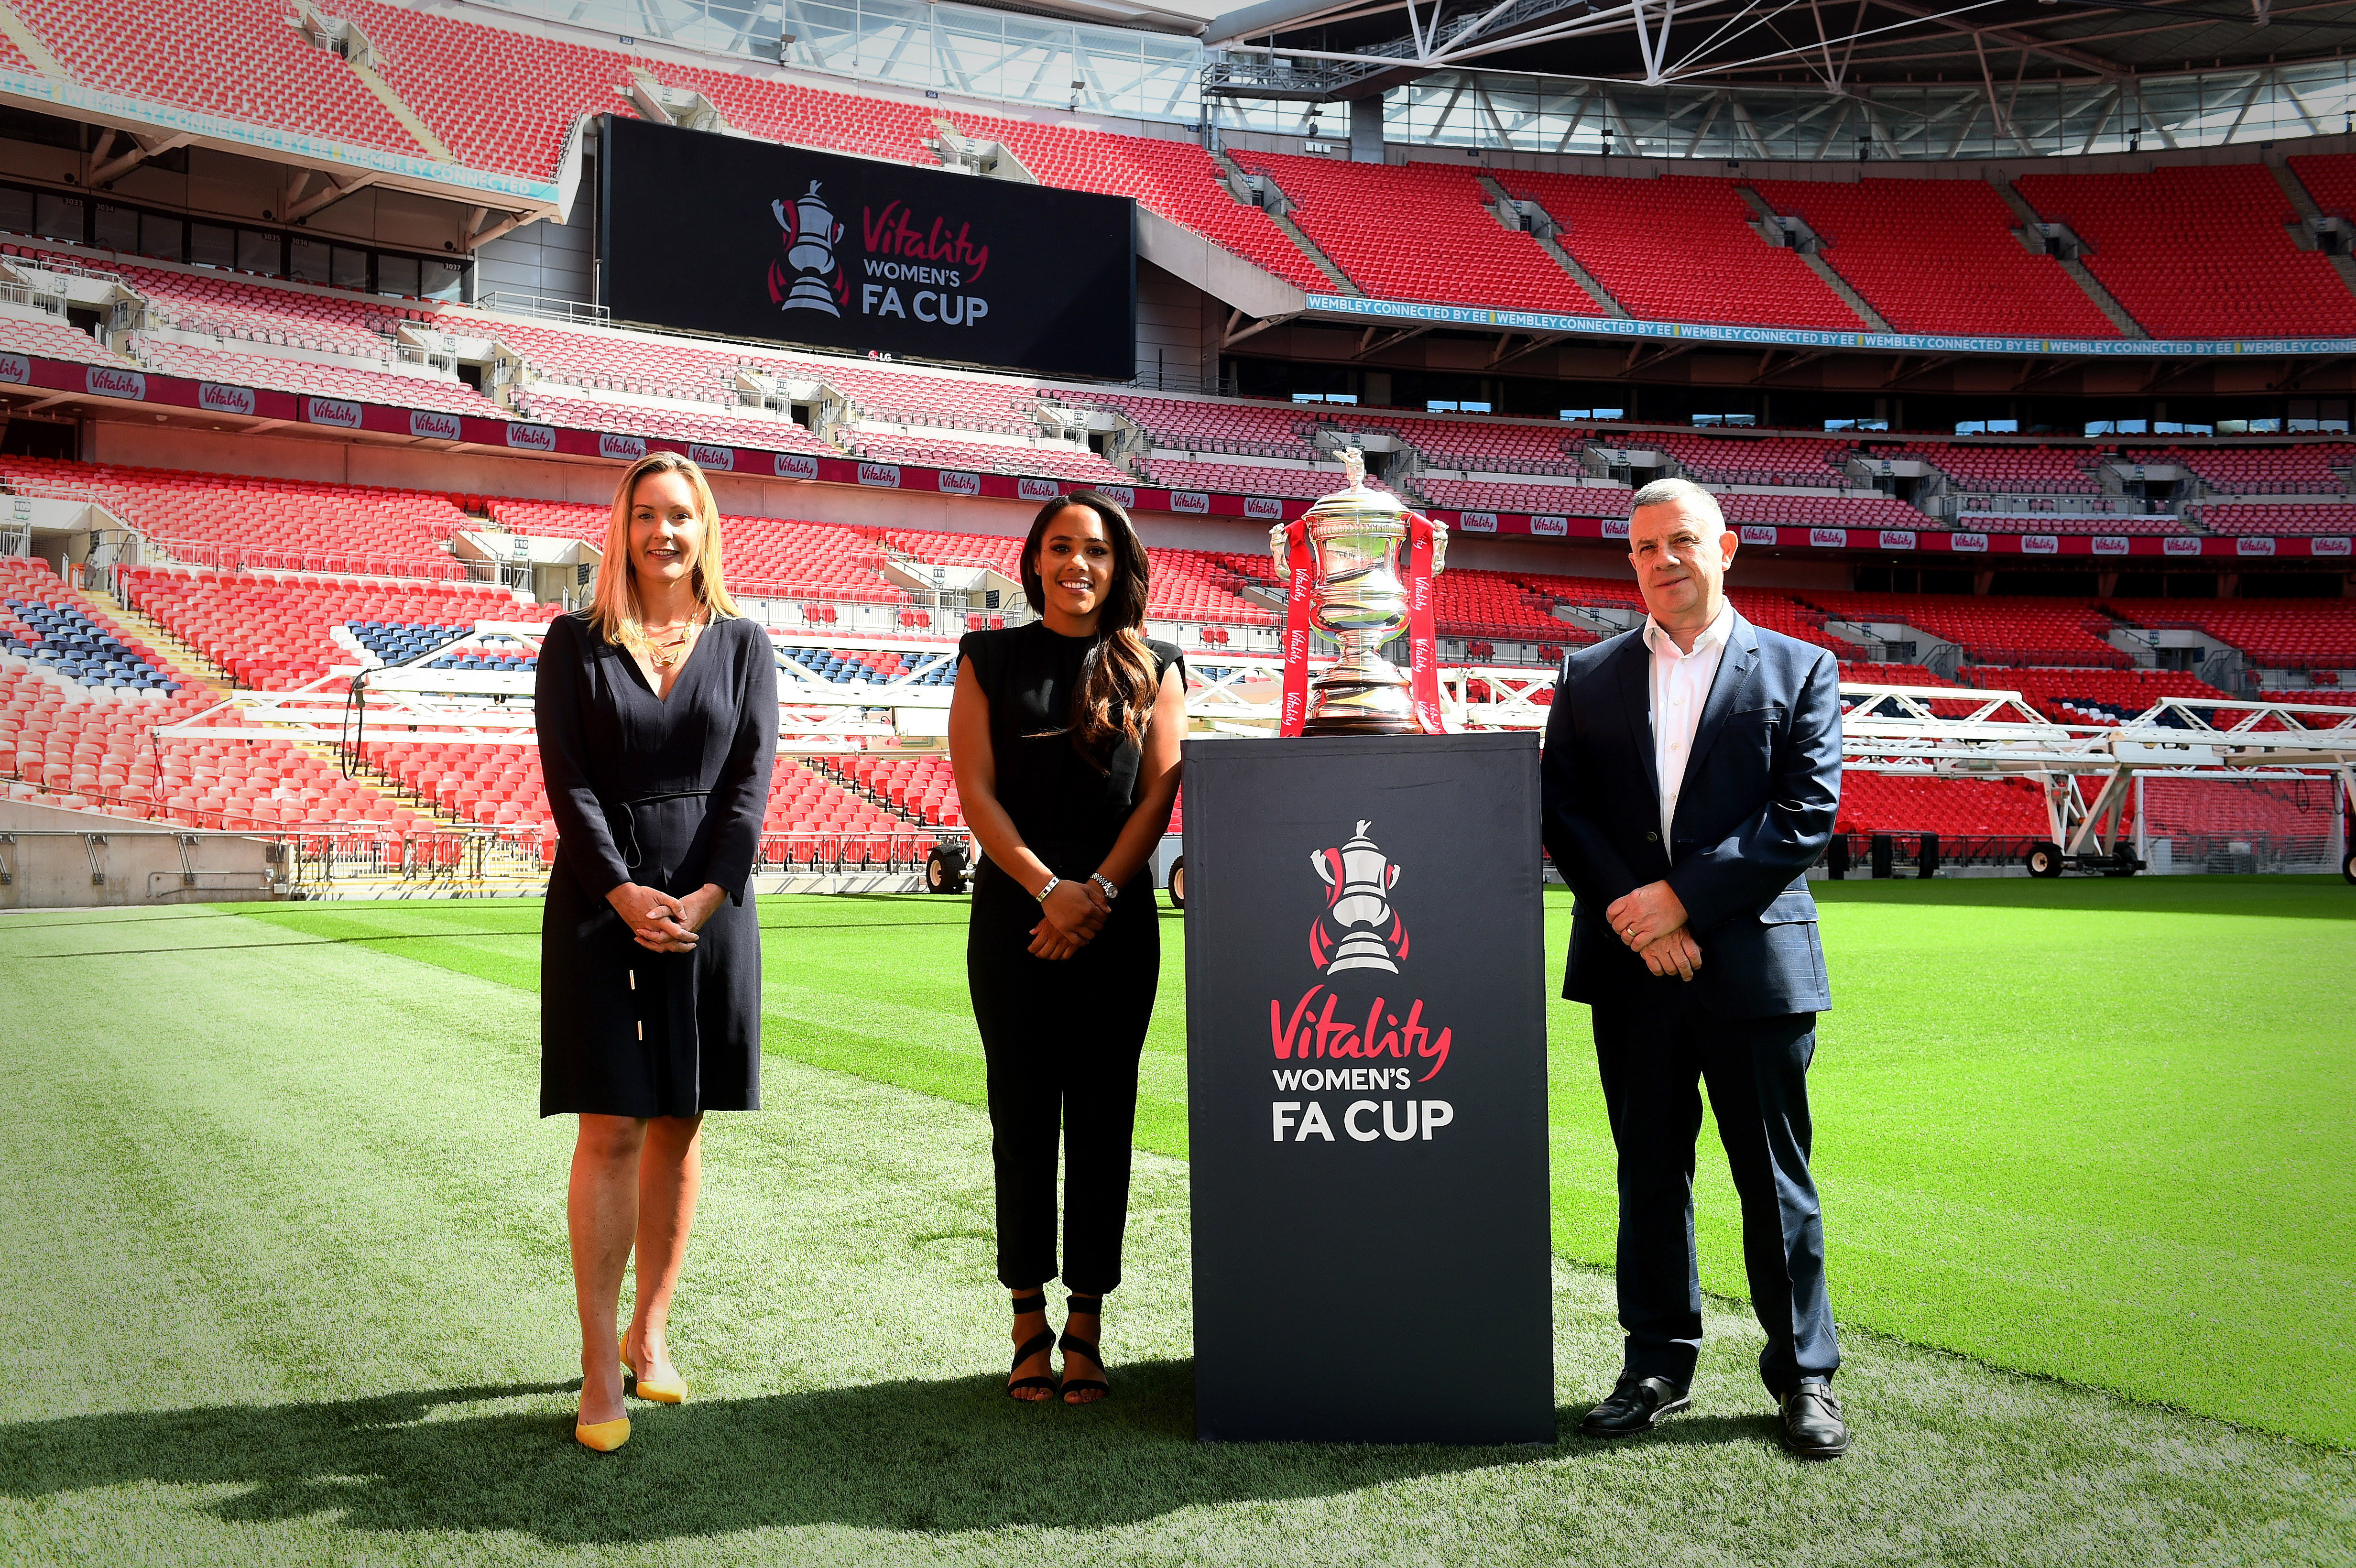 Alex Scott, centre, is an ambassador for Vitality, which has struck a deal to sponsor the Women's FA Cup. The former England defender is pictured alongside Vitality CEO Neville Koopowitz, right, and the FA marketing director Kathryn Swarbrick